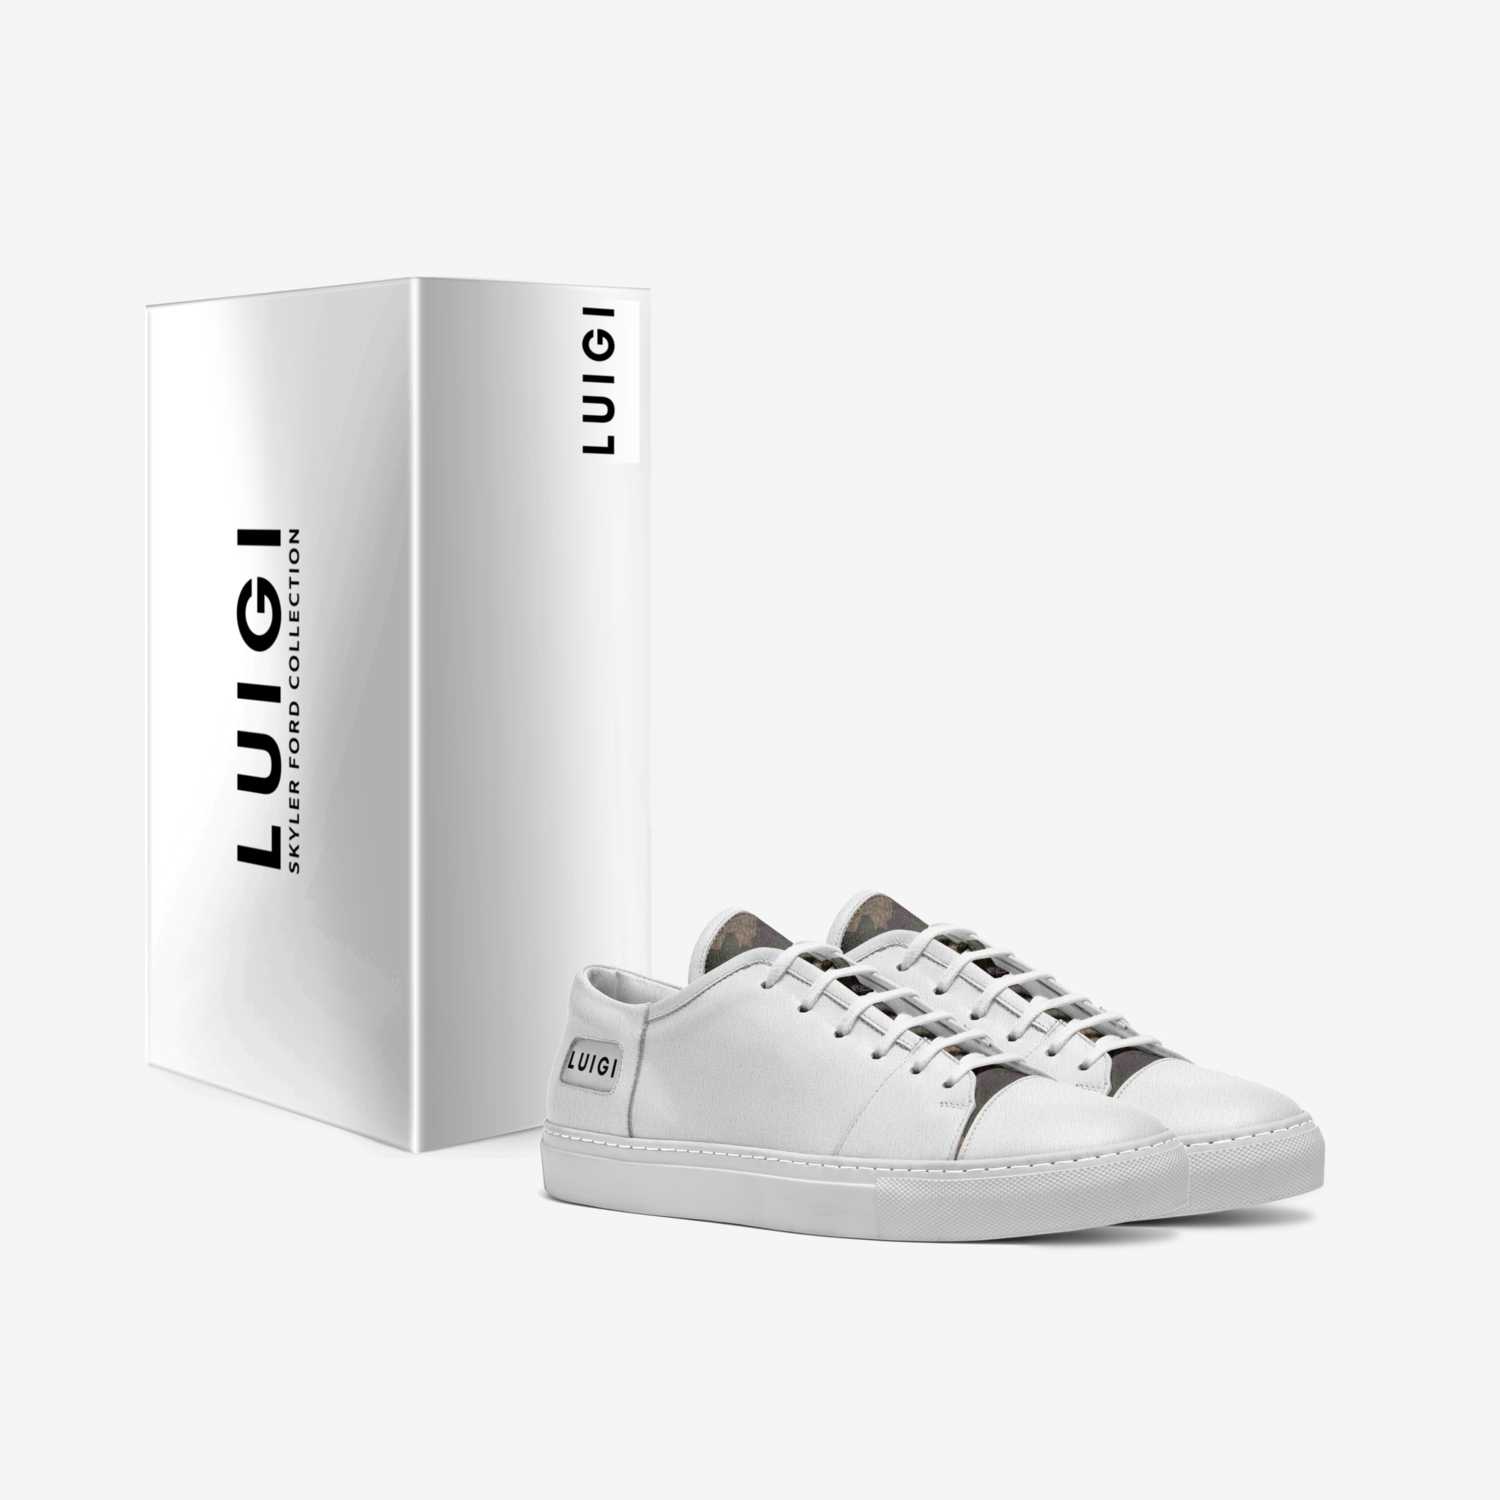 LUIGI 001 custom made in Italy shoes by Skyler Ford | Box view